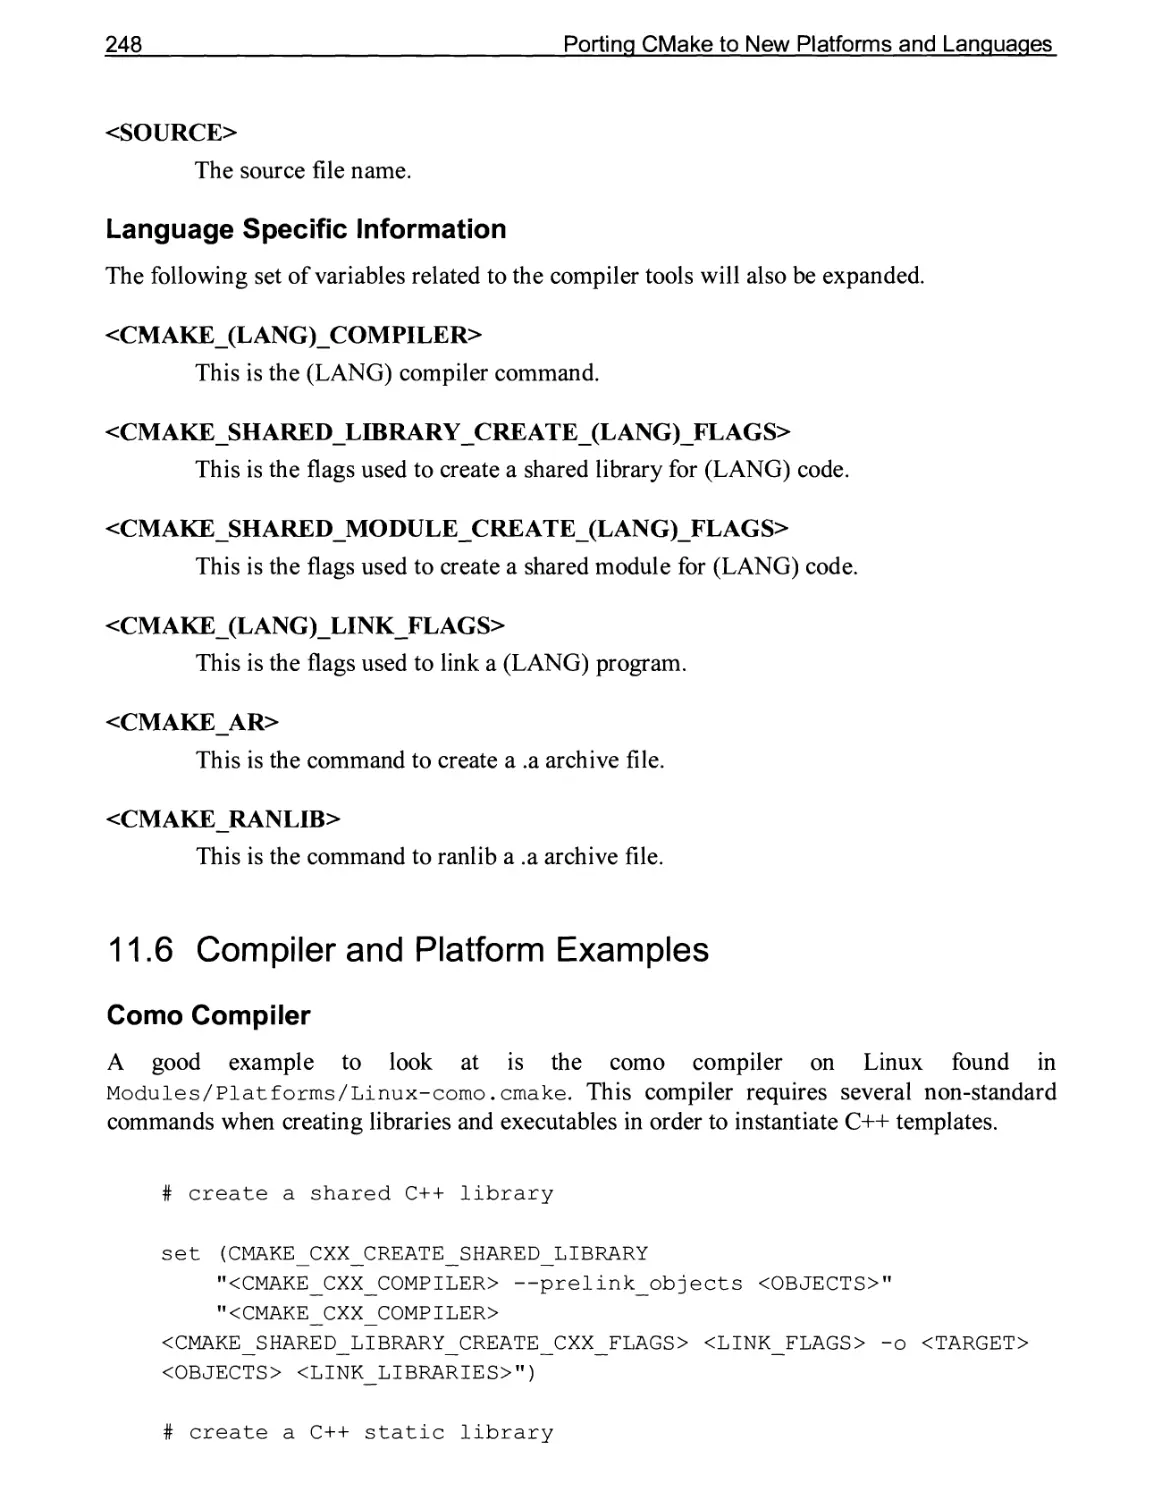 Language Specific Information
11.6 Compiler and Platform Examples